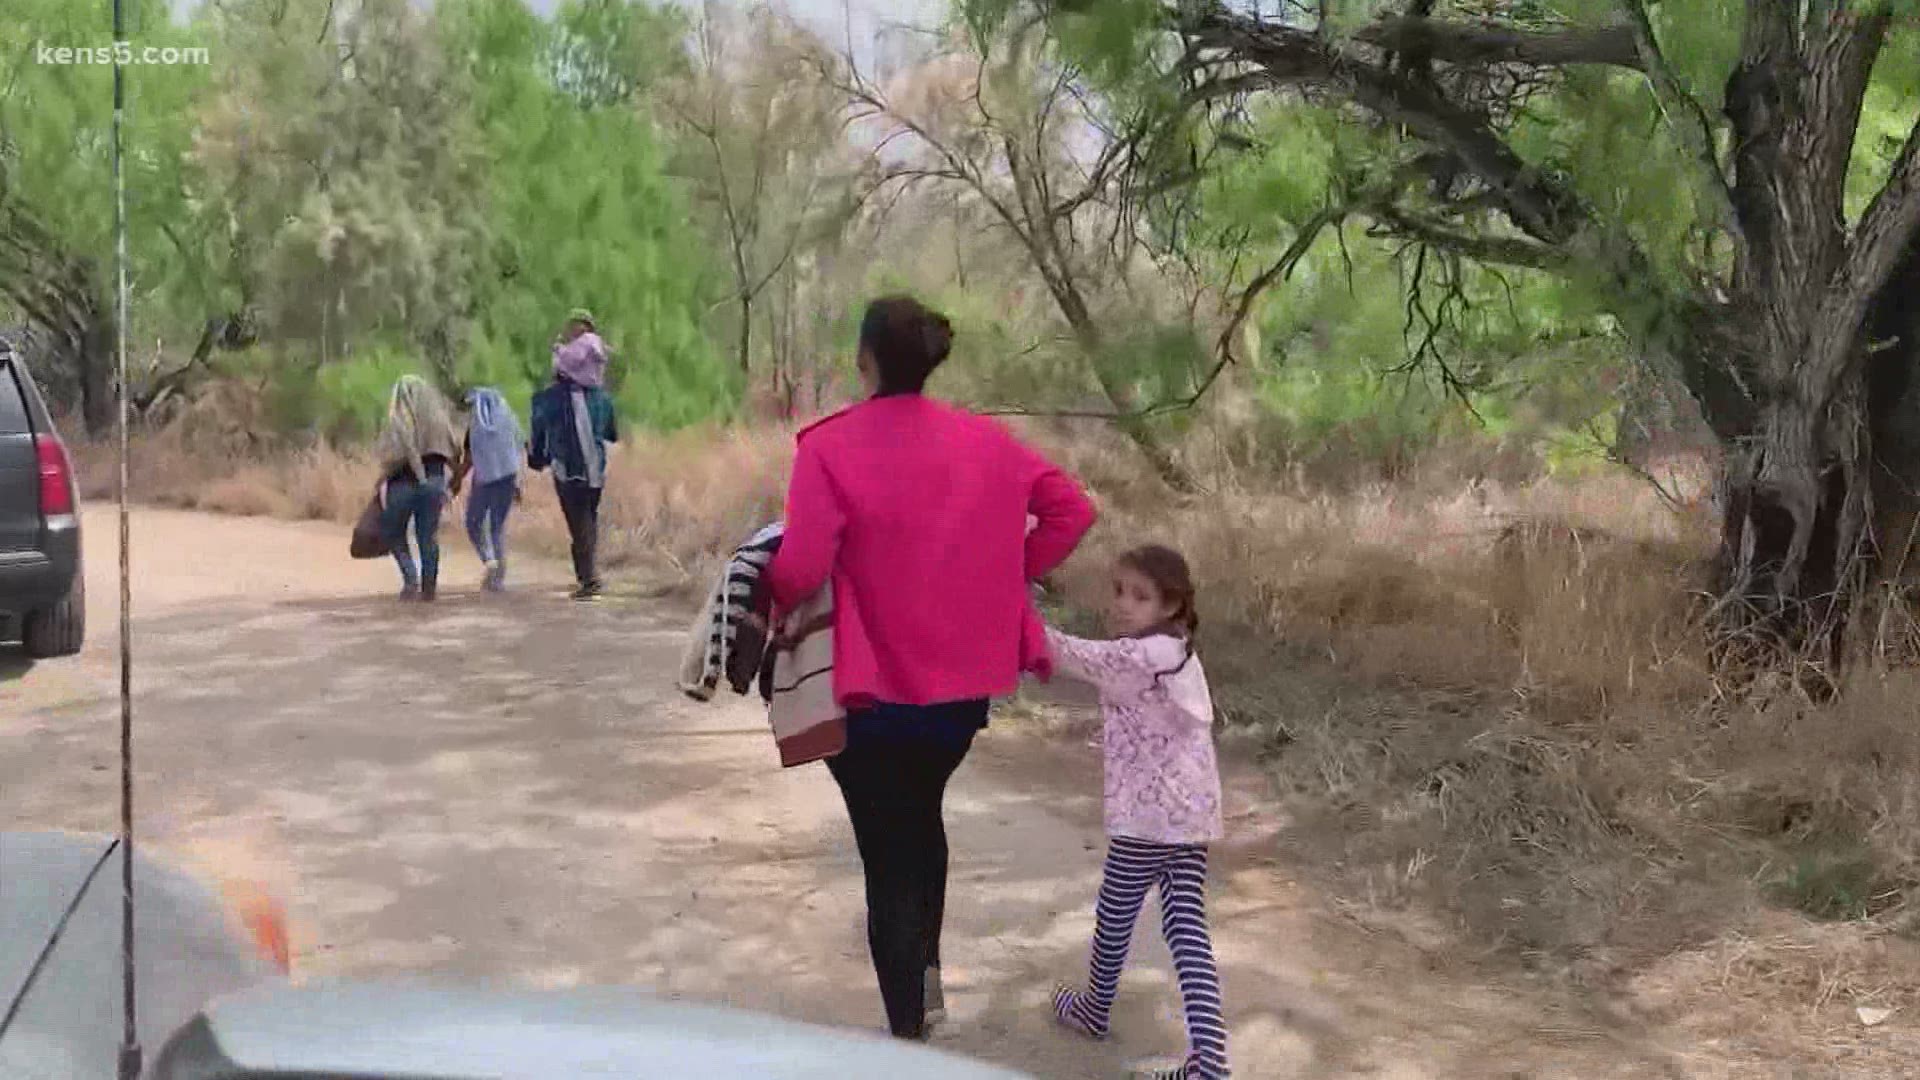 "Parents have to make a very difficult decision on separating from their children, so that they can get out of dangerous situations in Mexico," one expert said.